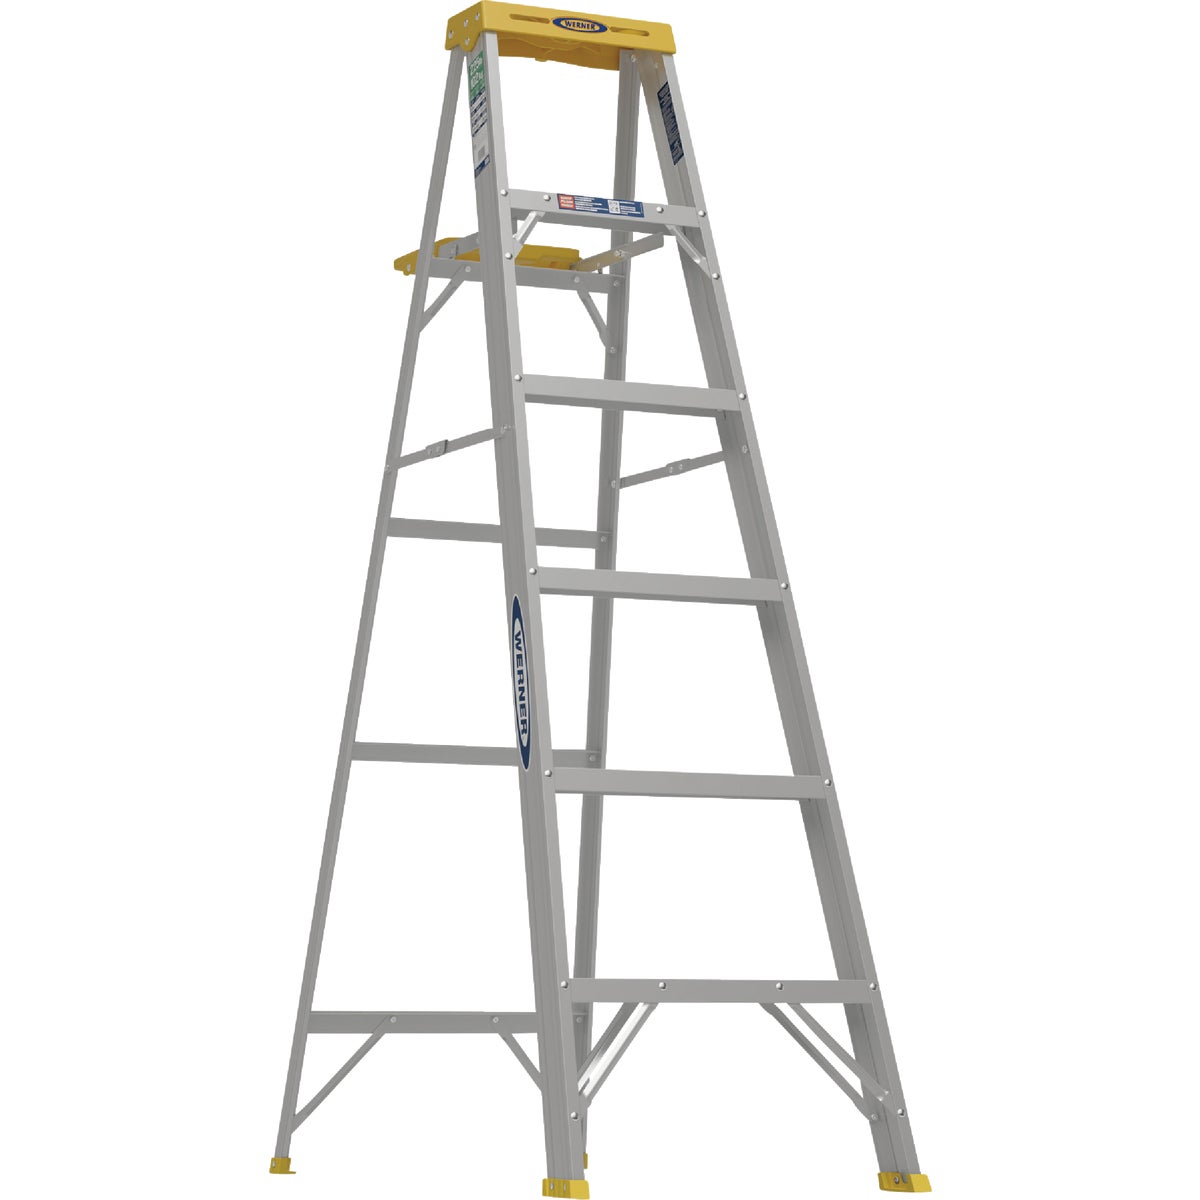 Werner 6 Ft. Aluminum Step Ladder with 225 Lb. Load Capacity Type II Ladder Rating